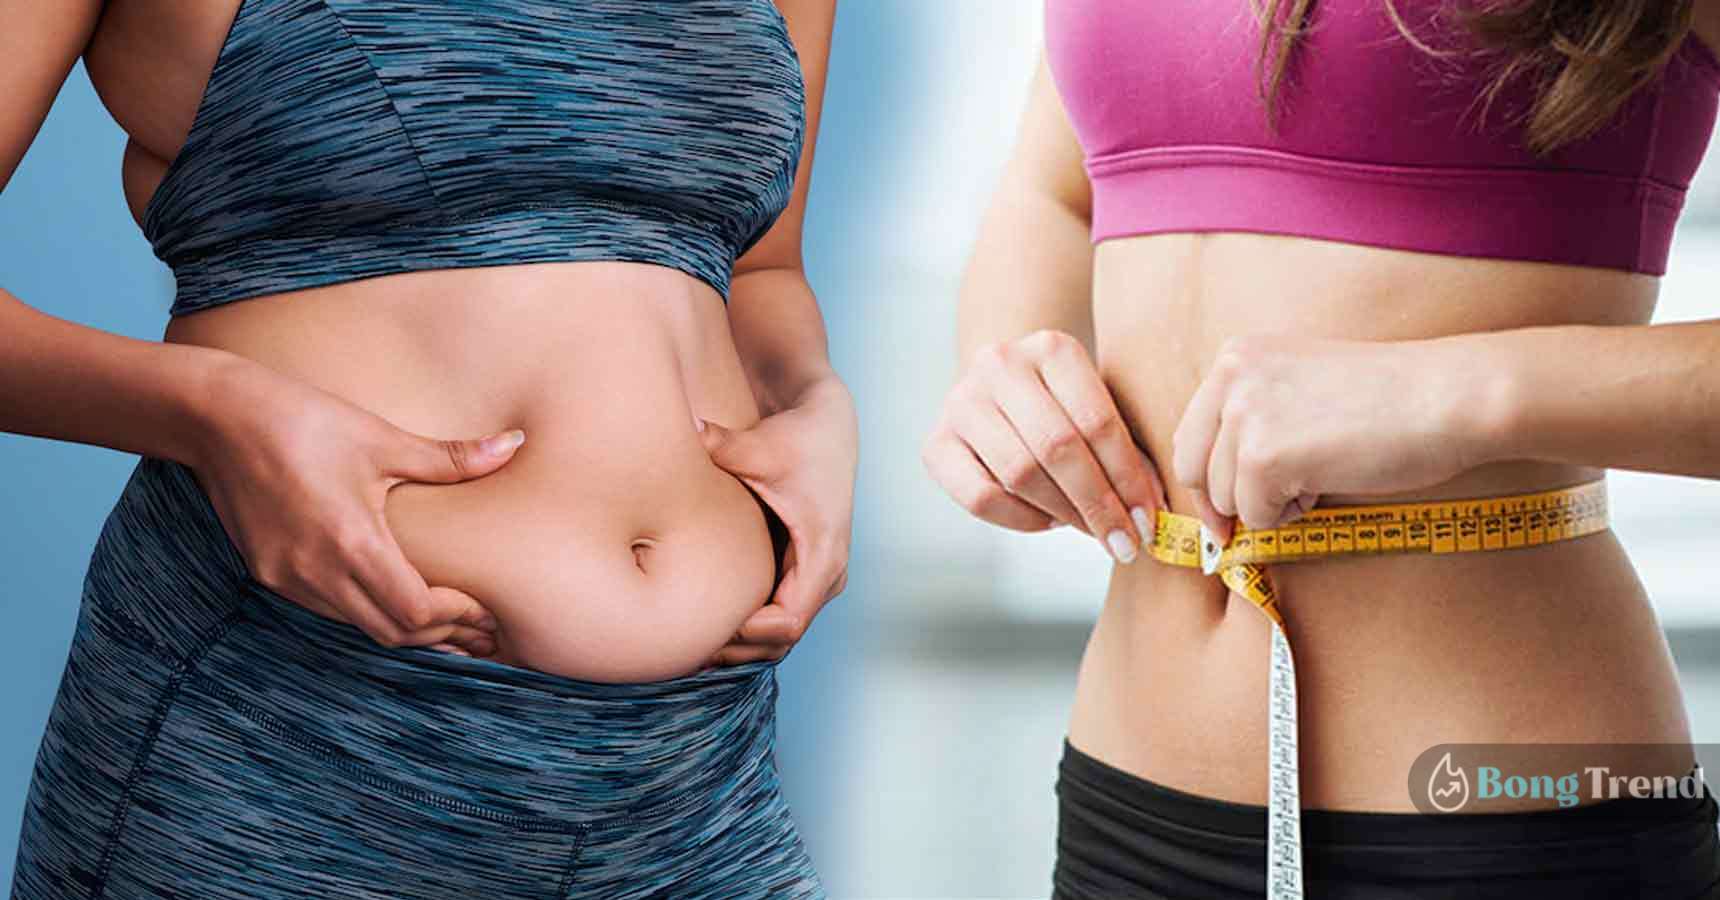 How to Reduce Lower Belly Fat